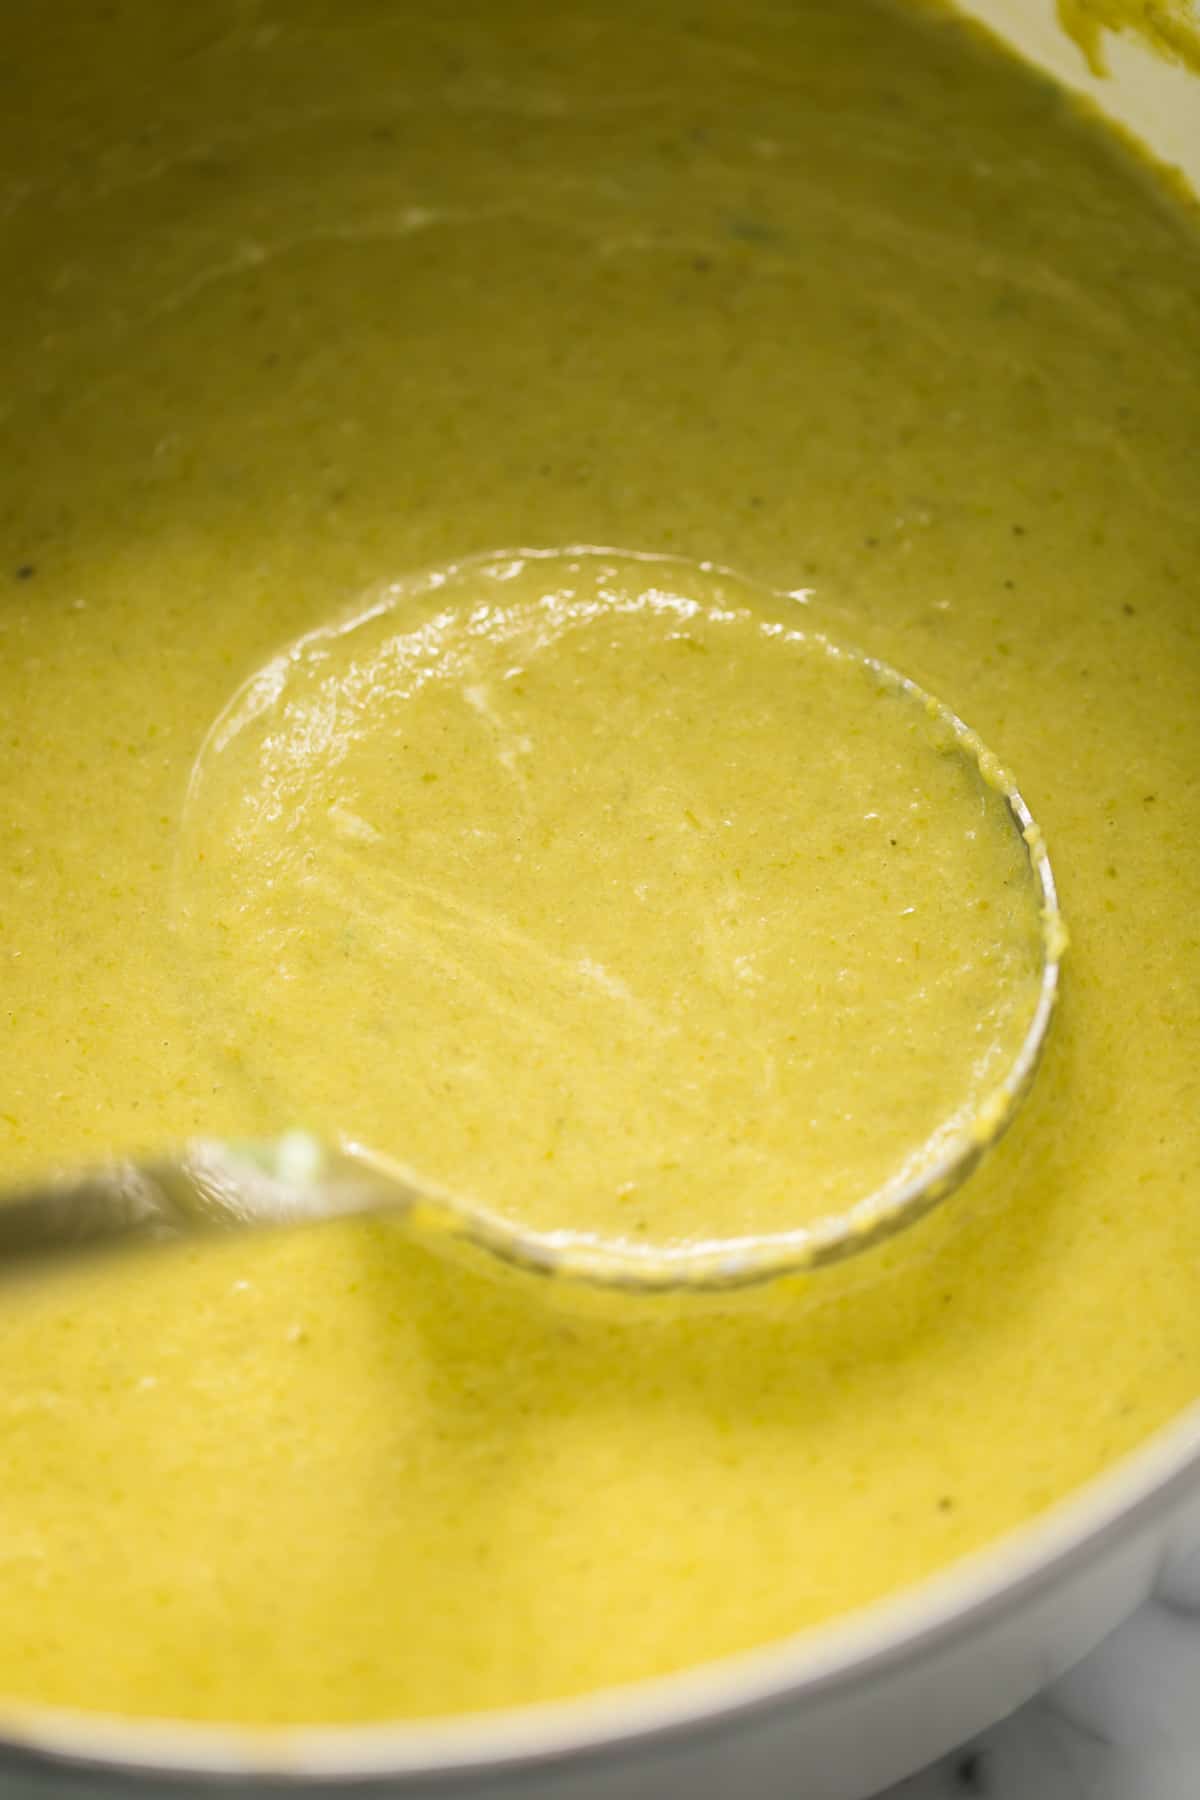 Smooth asparagus soup just blended and poured back into the pot to continue simmering. A silver ladle stirs through the soup.